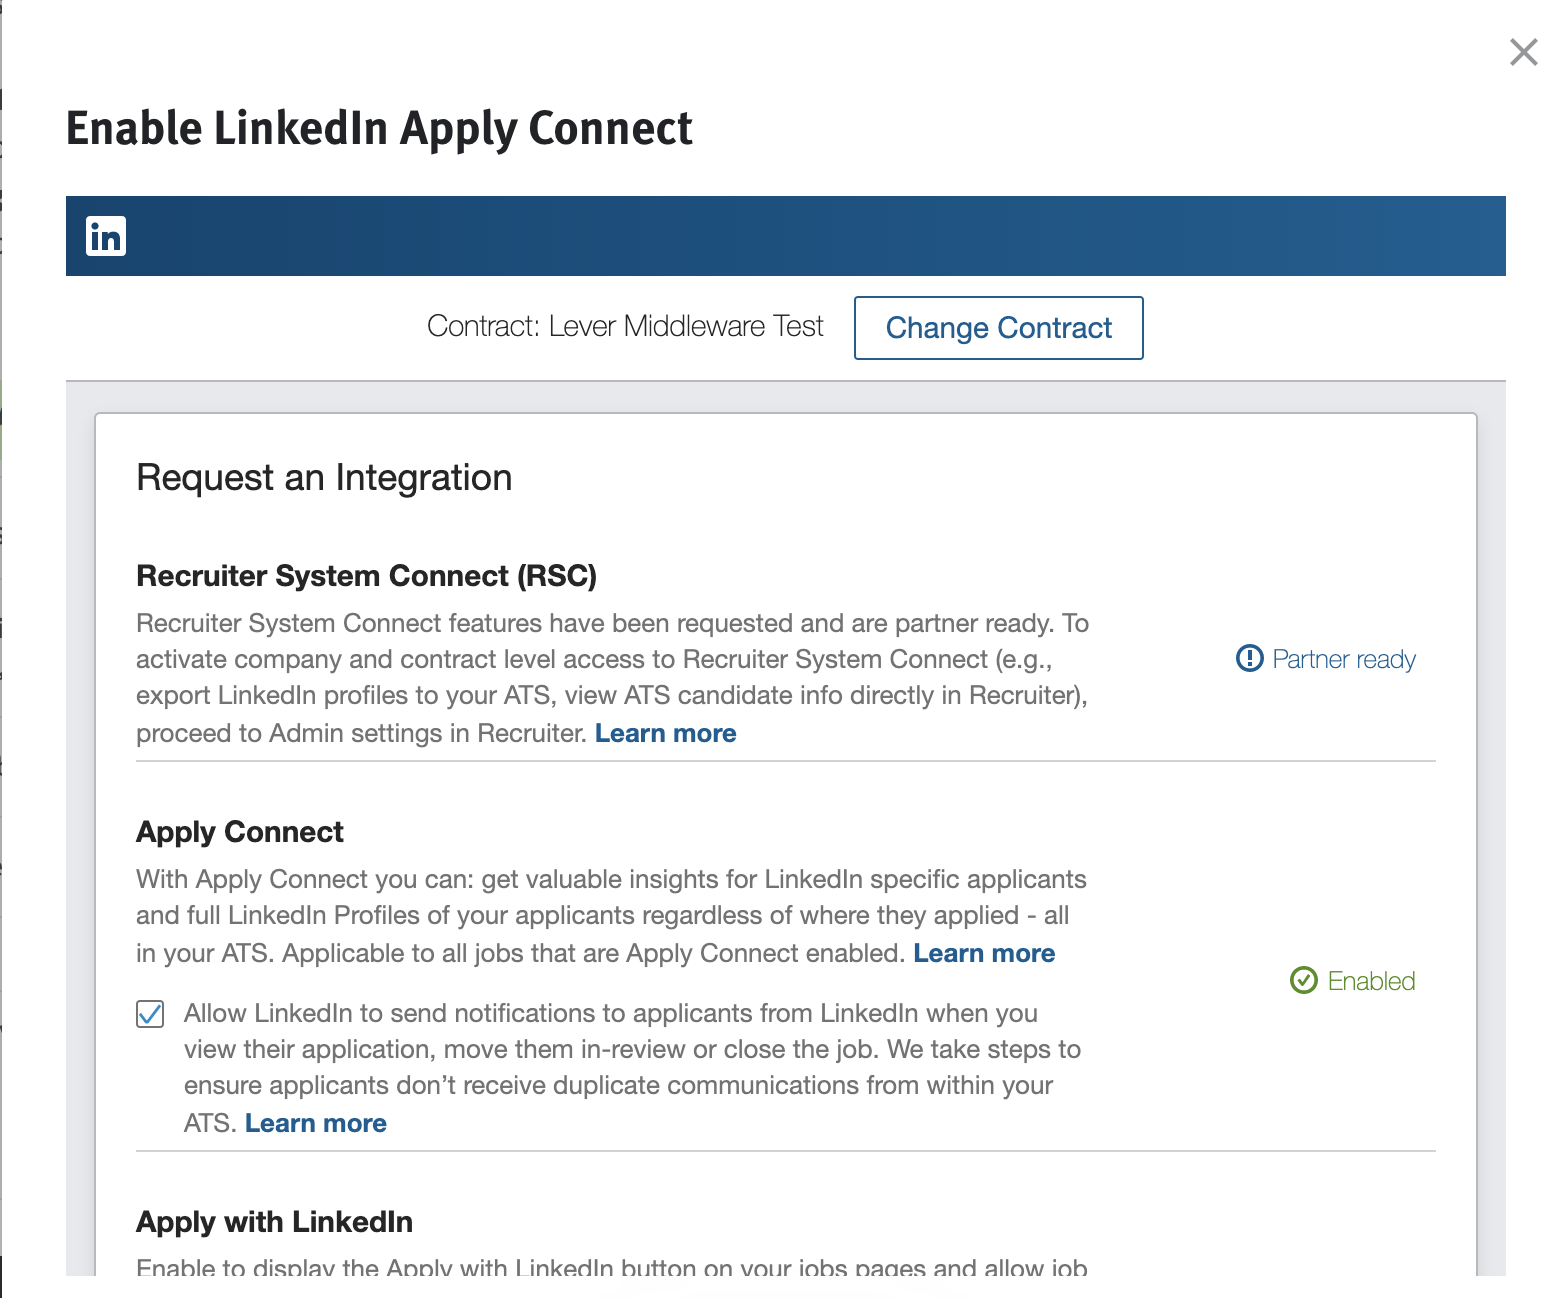 Enable LinkedIn Apply Connect window with integration request list; Apply Connect is listed as enabled.